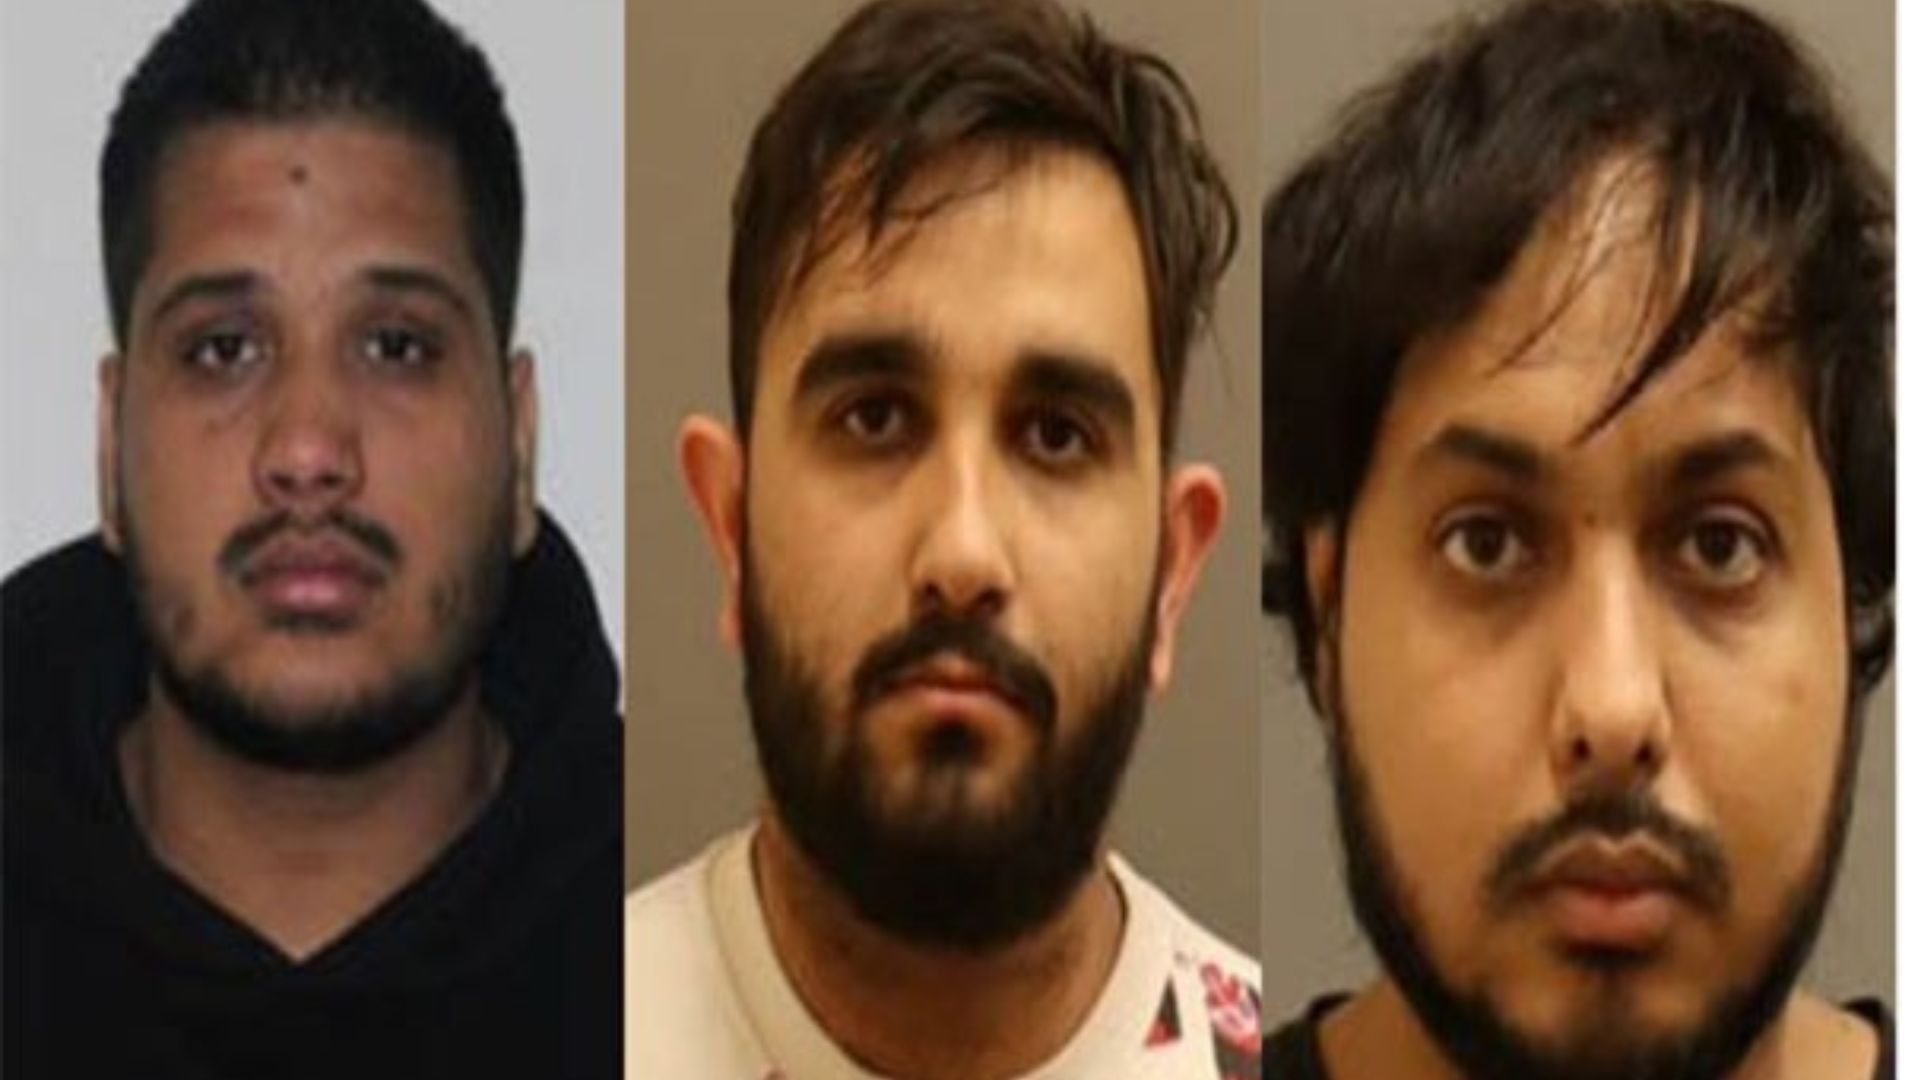 Nijjar Murder Case: Canada Police Releases Pictures Of Three Accused With Other Evidence